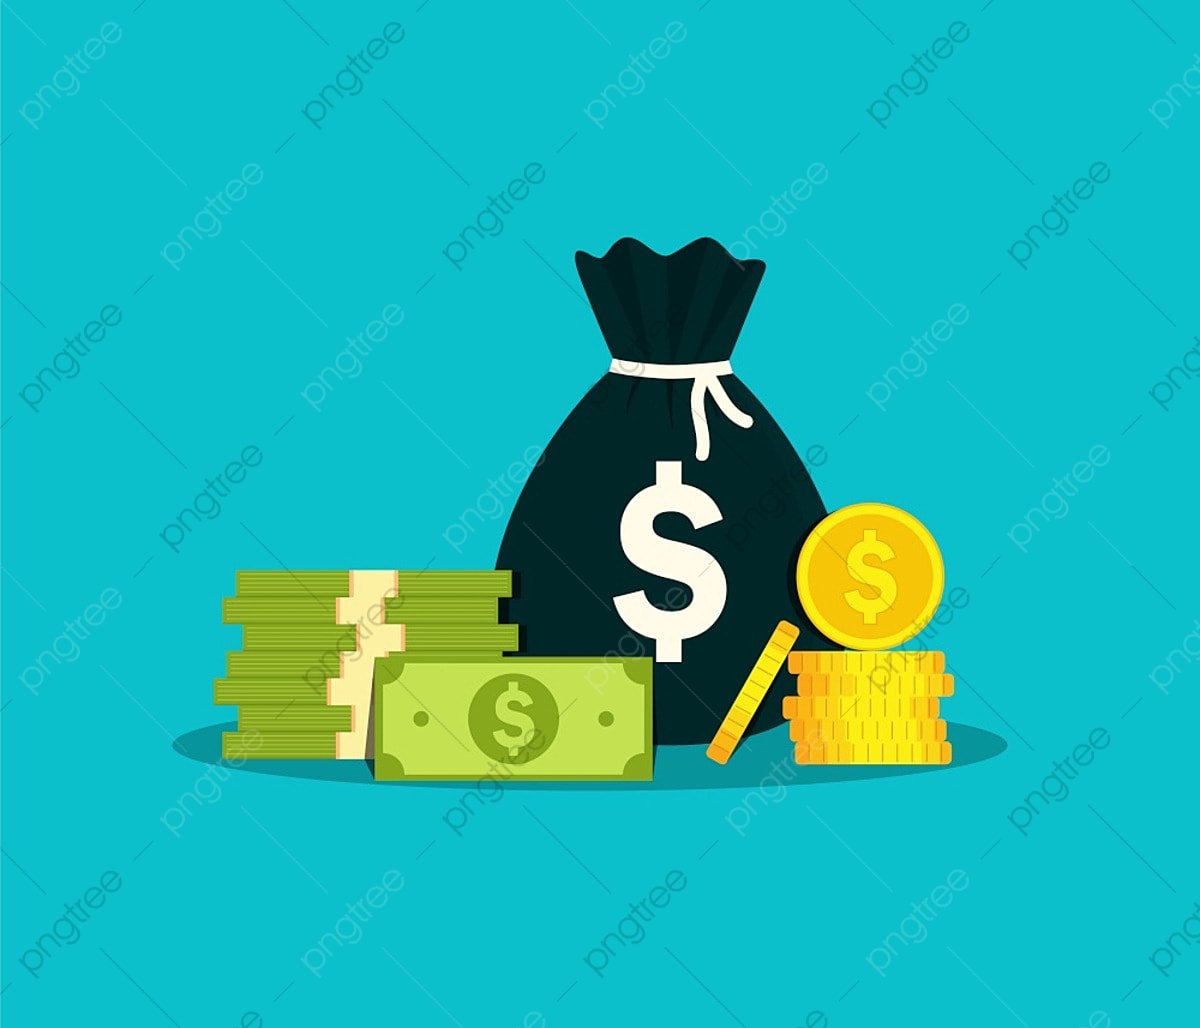 pngtree money bag for salary png image 8065307